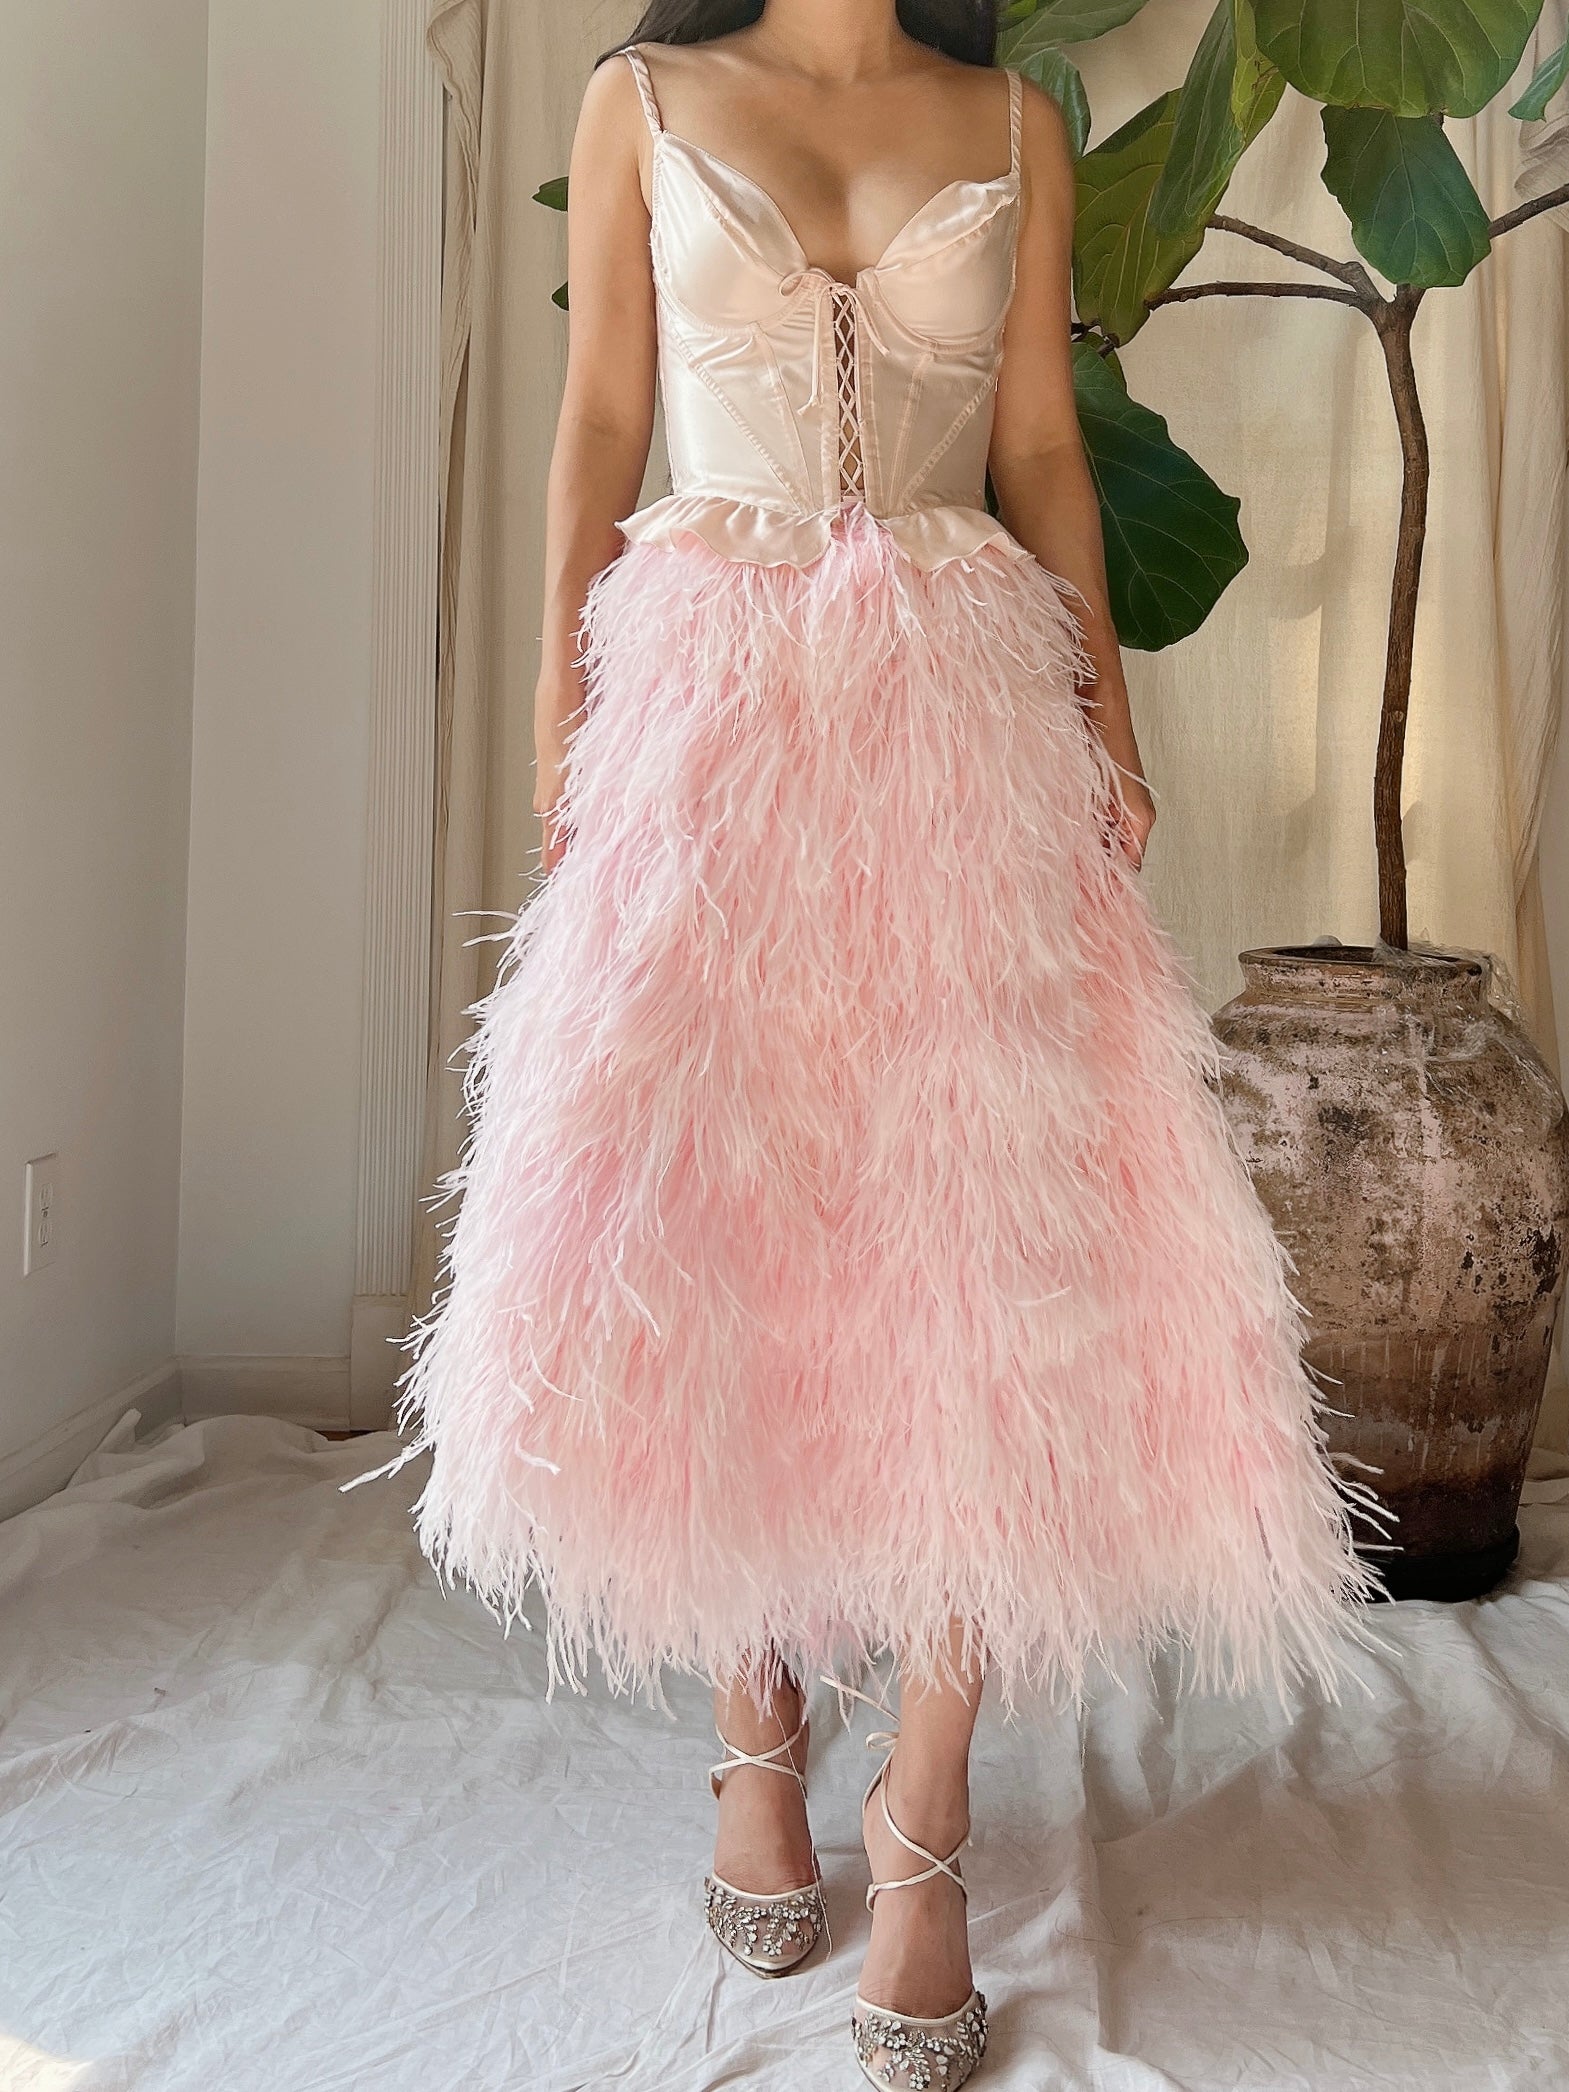 Soft Pink Feather Skirt - S-L